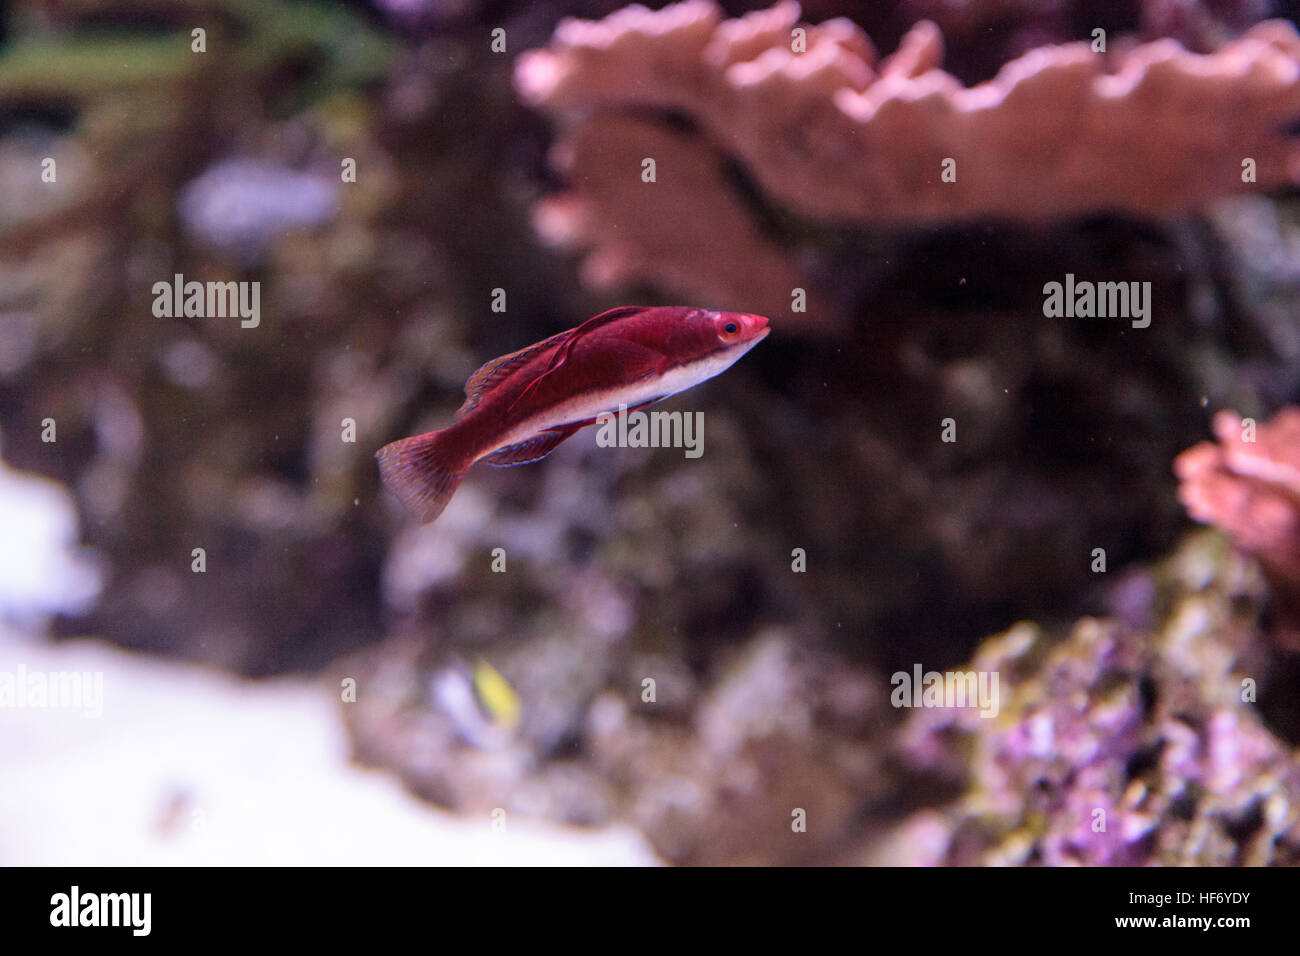 Dark red Cirrhilabrus sailfin fairy wrasse found in the Philippines on a coral reef Stock Photo